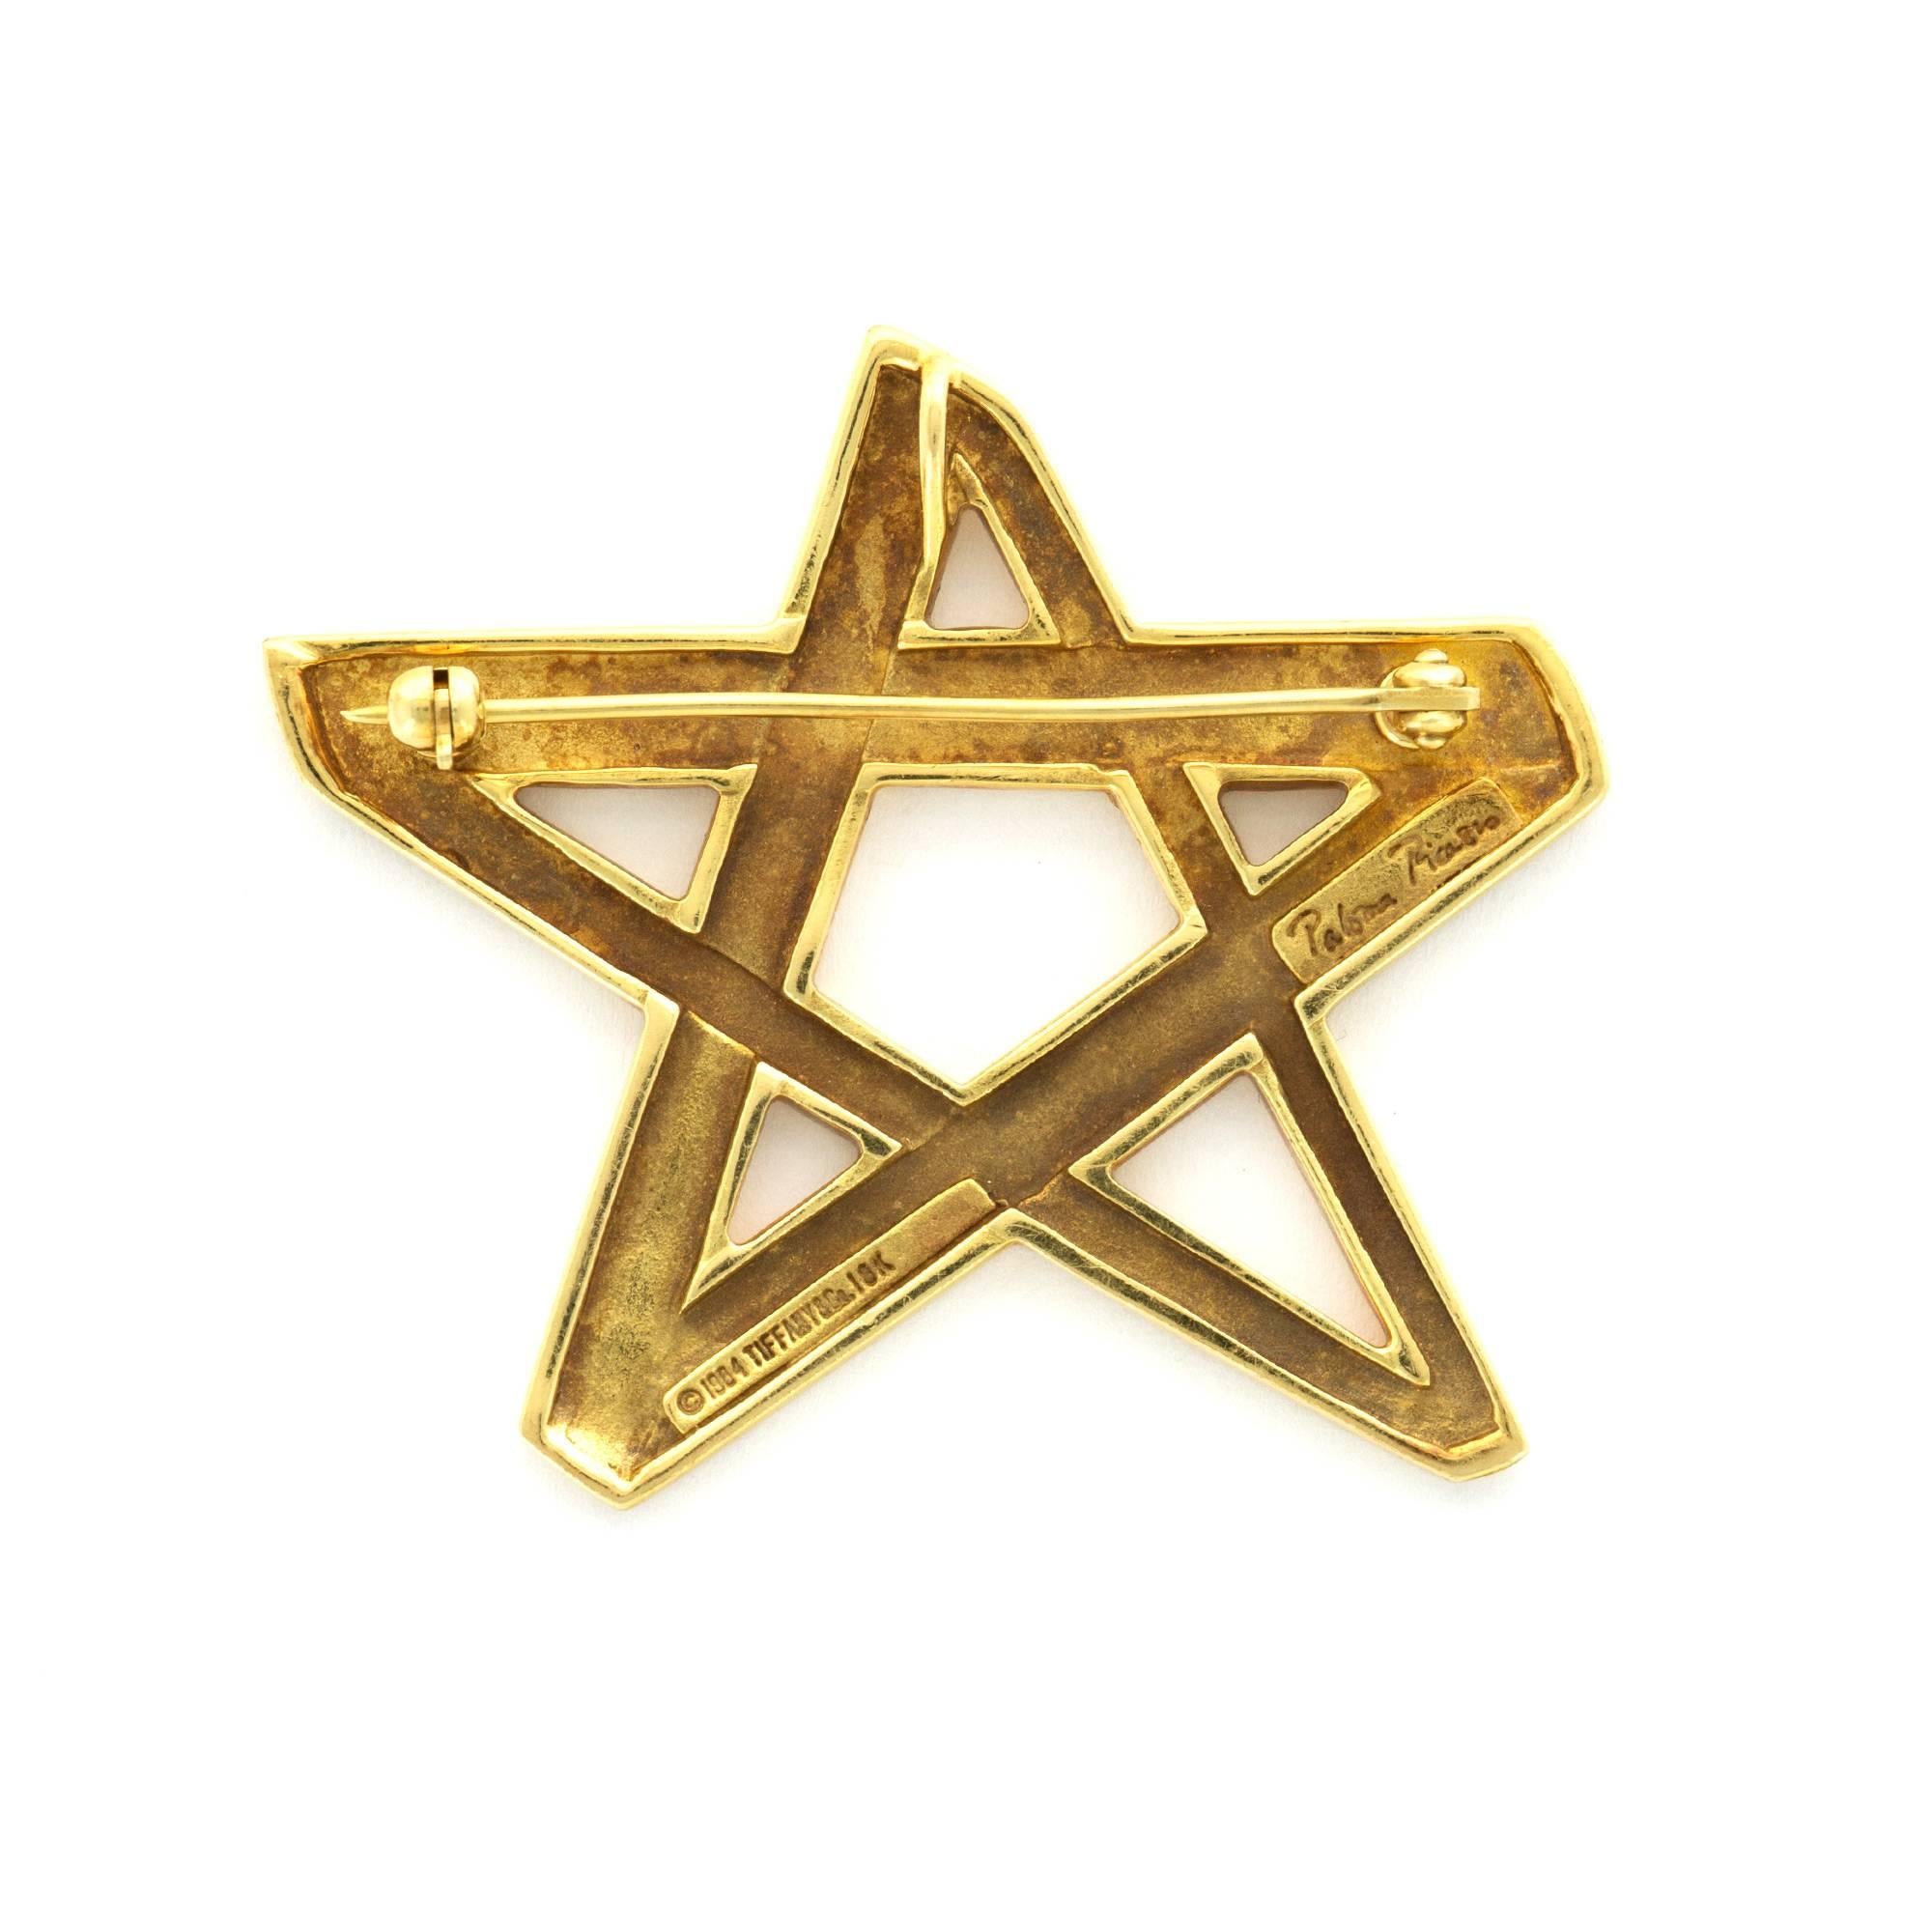 An 18k Yellow Gold Star-Design Brooch by Tiffany & Company. Designed by Paloma Picasso. 43mm Diameter. Signed "Tiffany & Co. & Paloma Picasso"